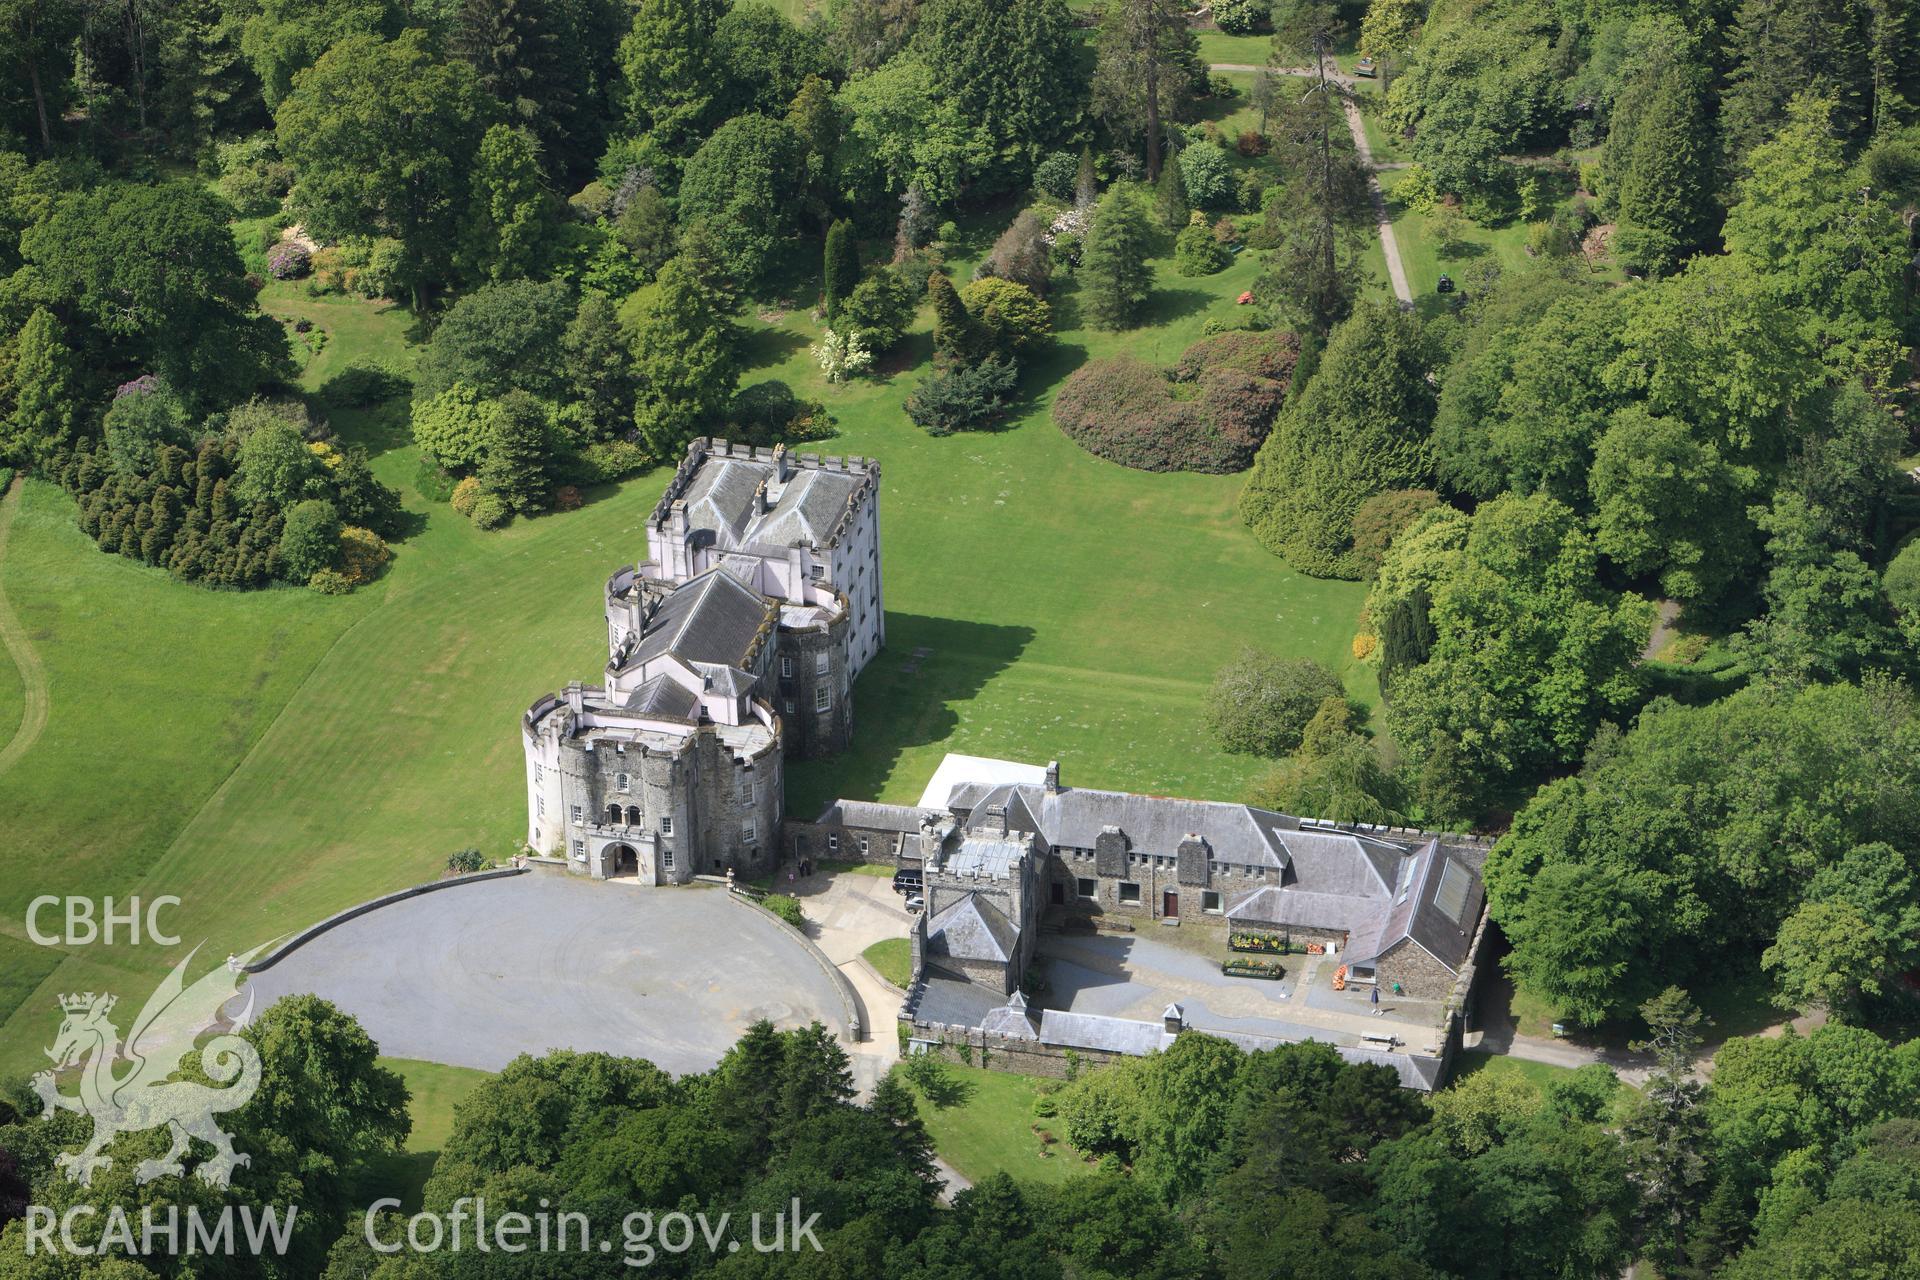 RCAHMW colour oblique photograph of Picton Castle, Slebech. Taken by Toby Driver on 24/05/2011.